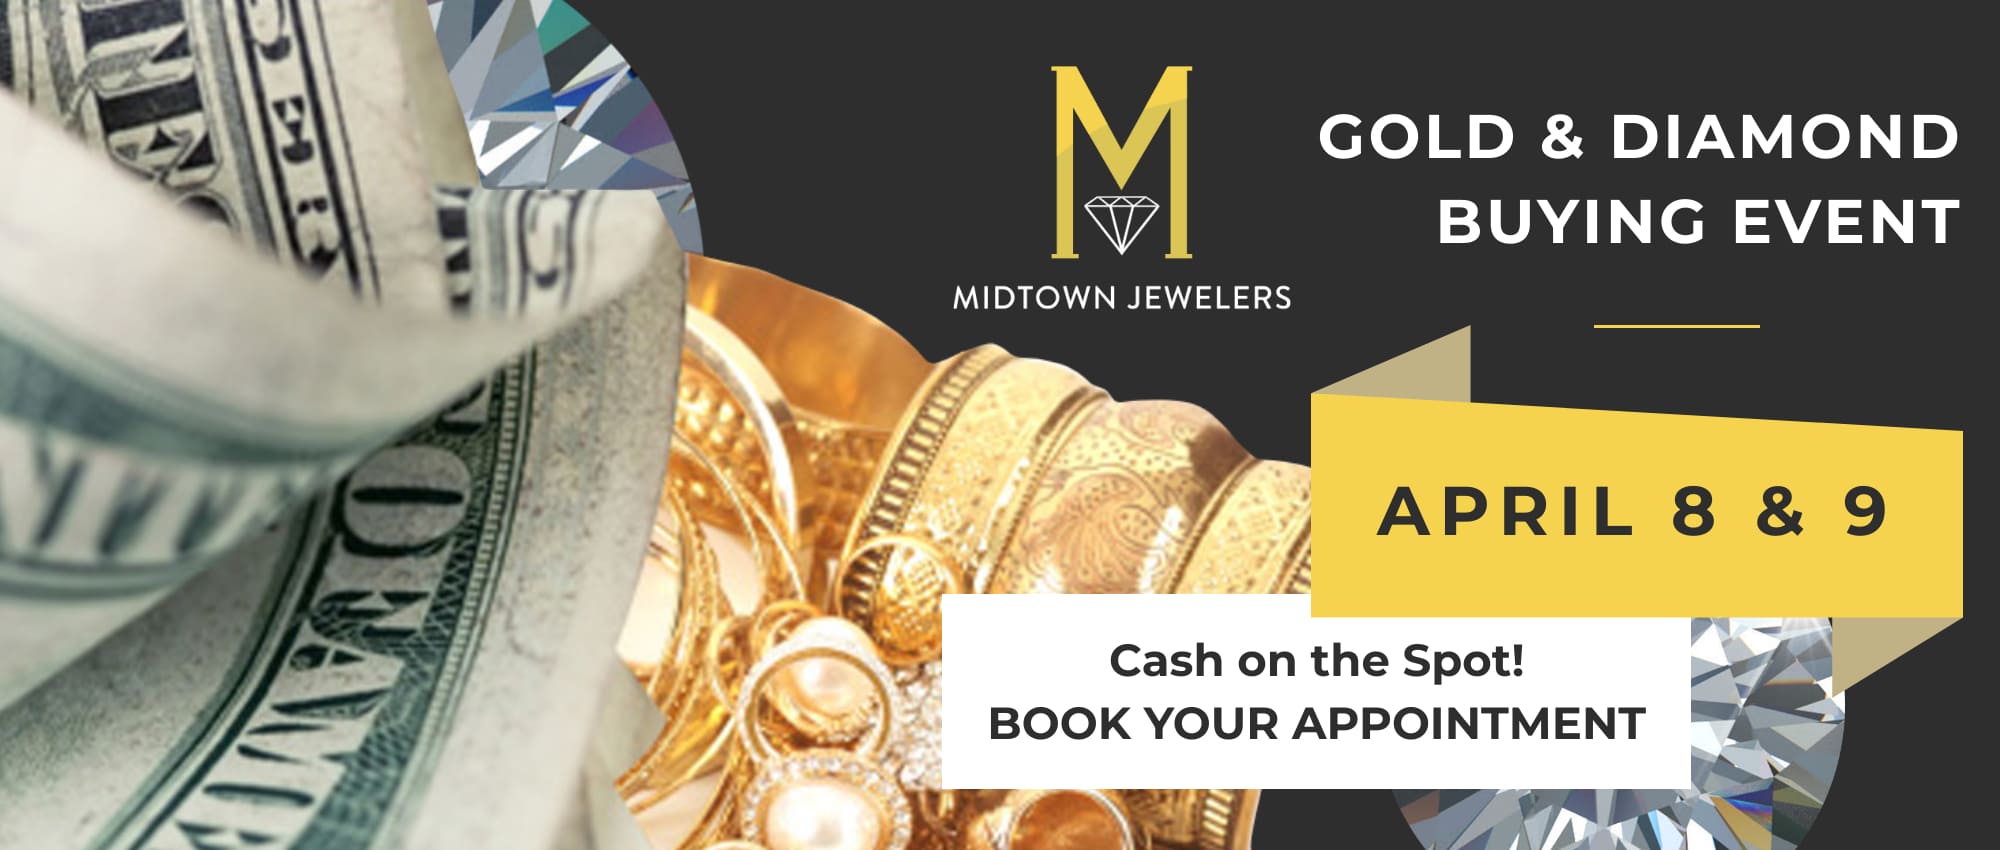 Gold and Diamond Buying Event at Midtwon Jewelers At Midtown Jewelers